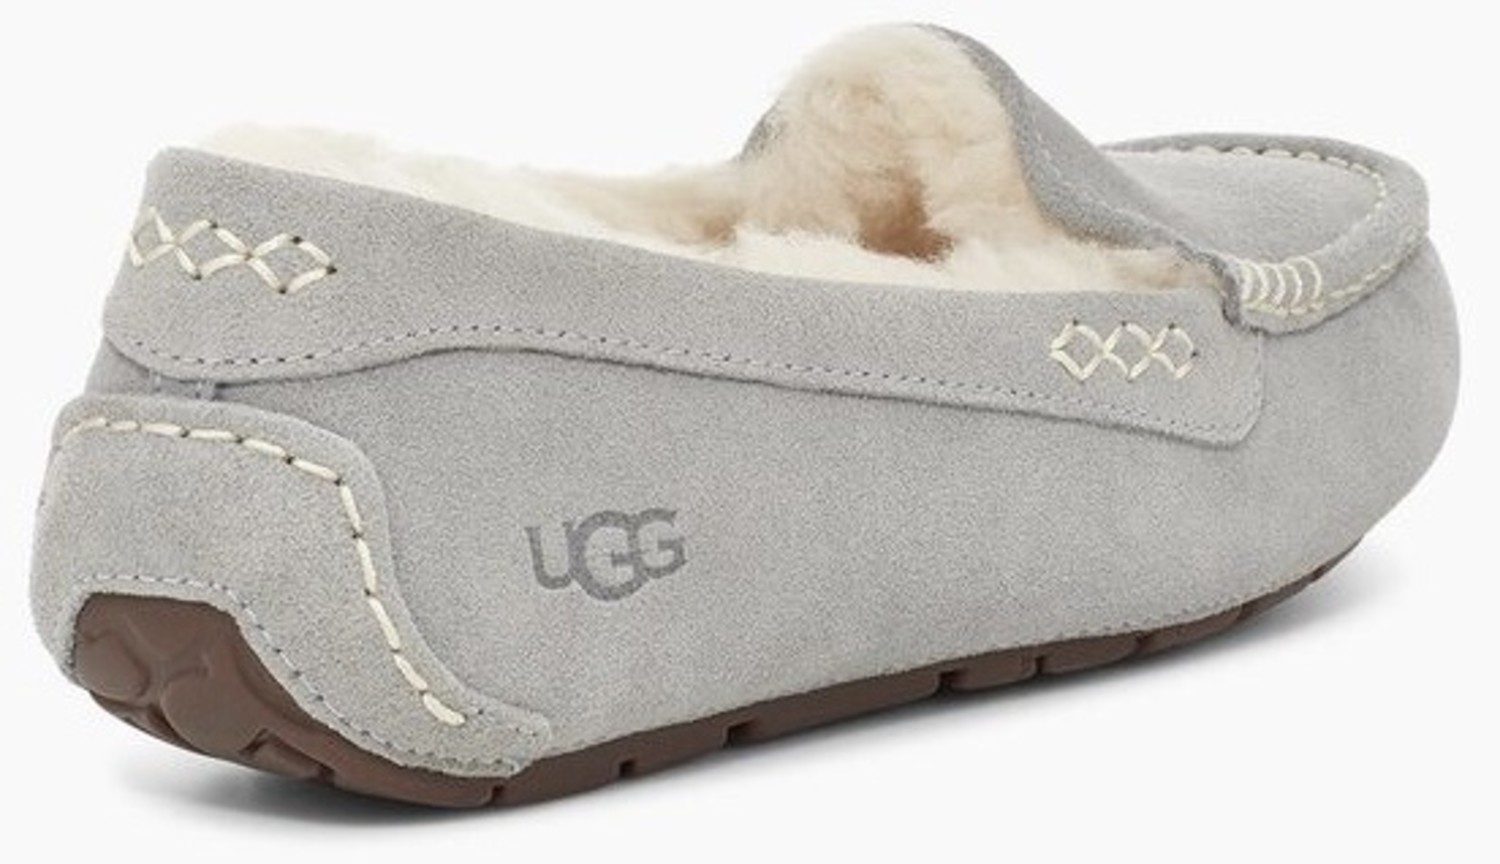 UGG Women's Ansley Light Grey - Continental Shoes